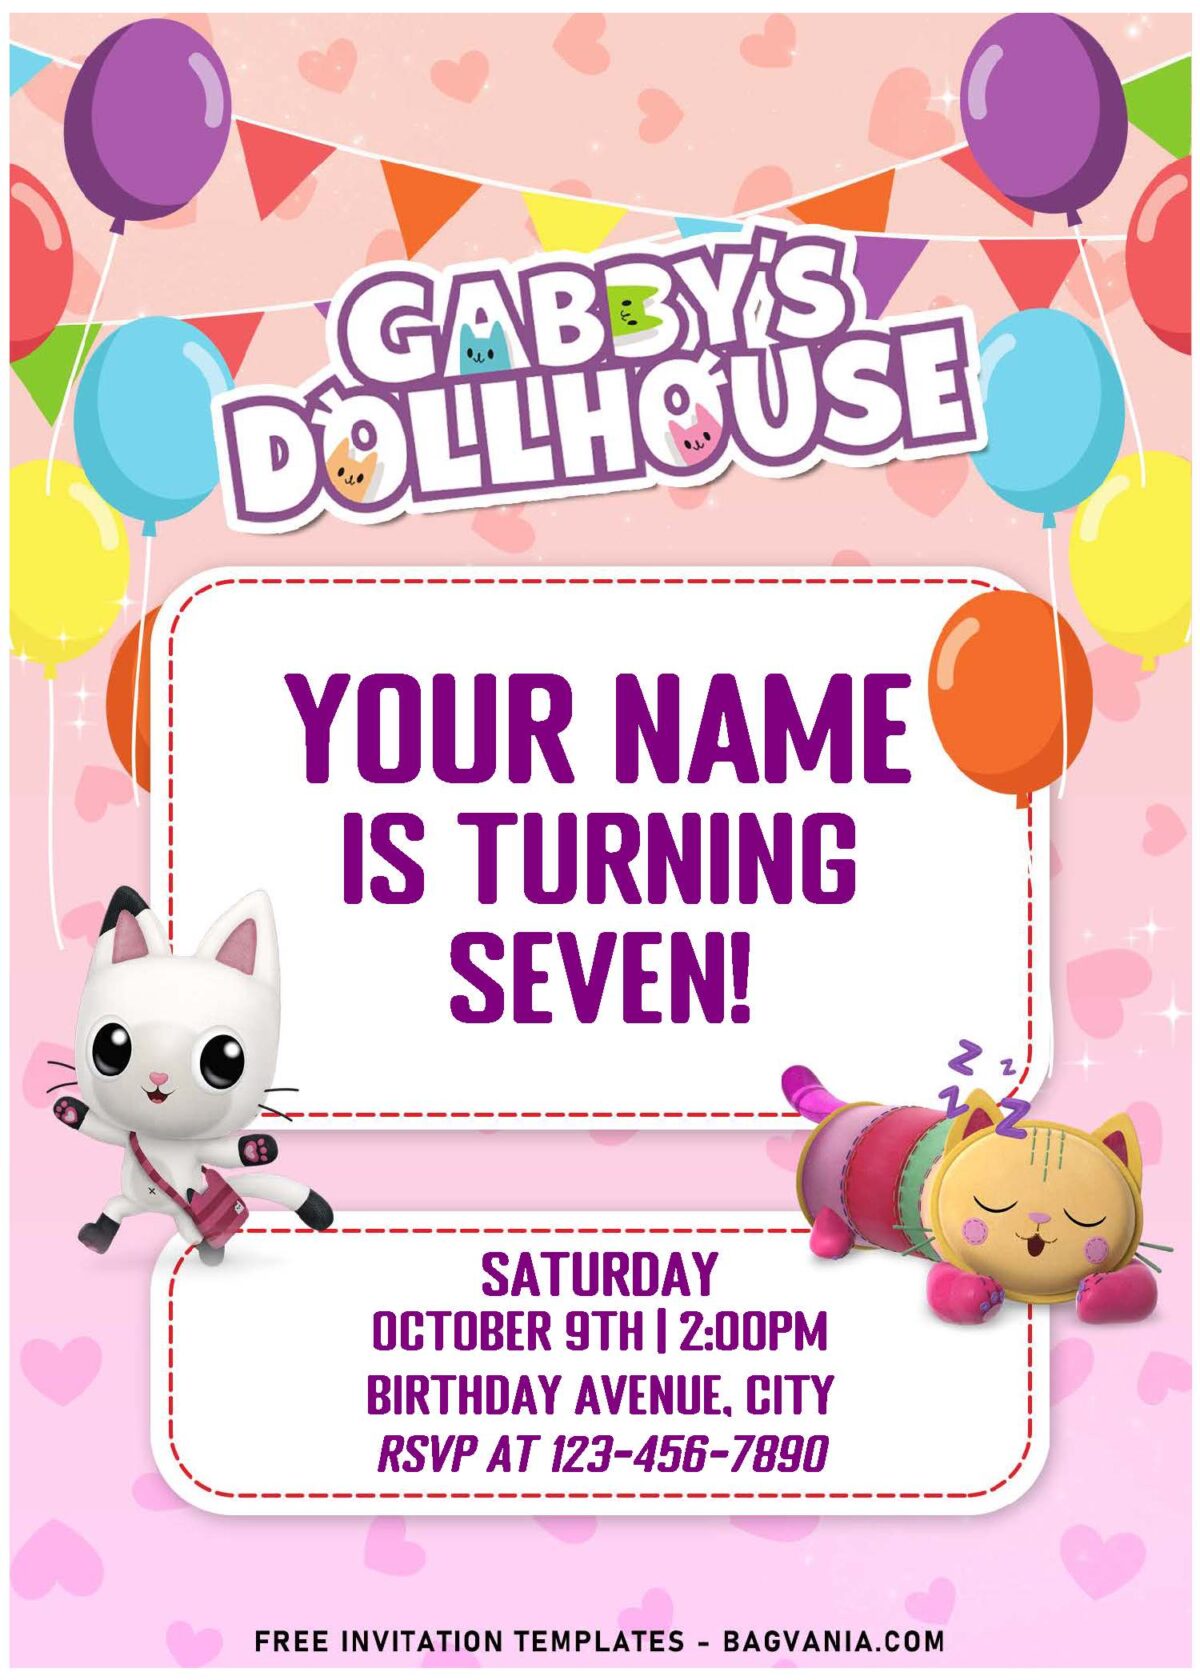 (Free Editable PDF) Purr-fect Gabby's Dollhouse Birthday Invitation Templates with pink background